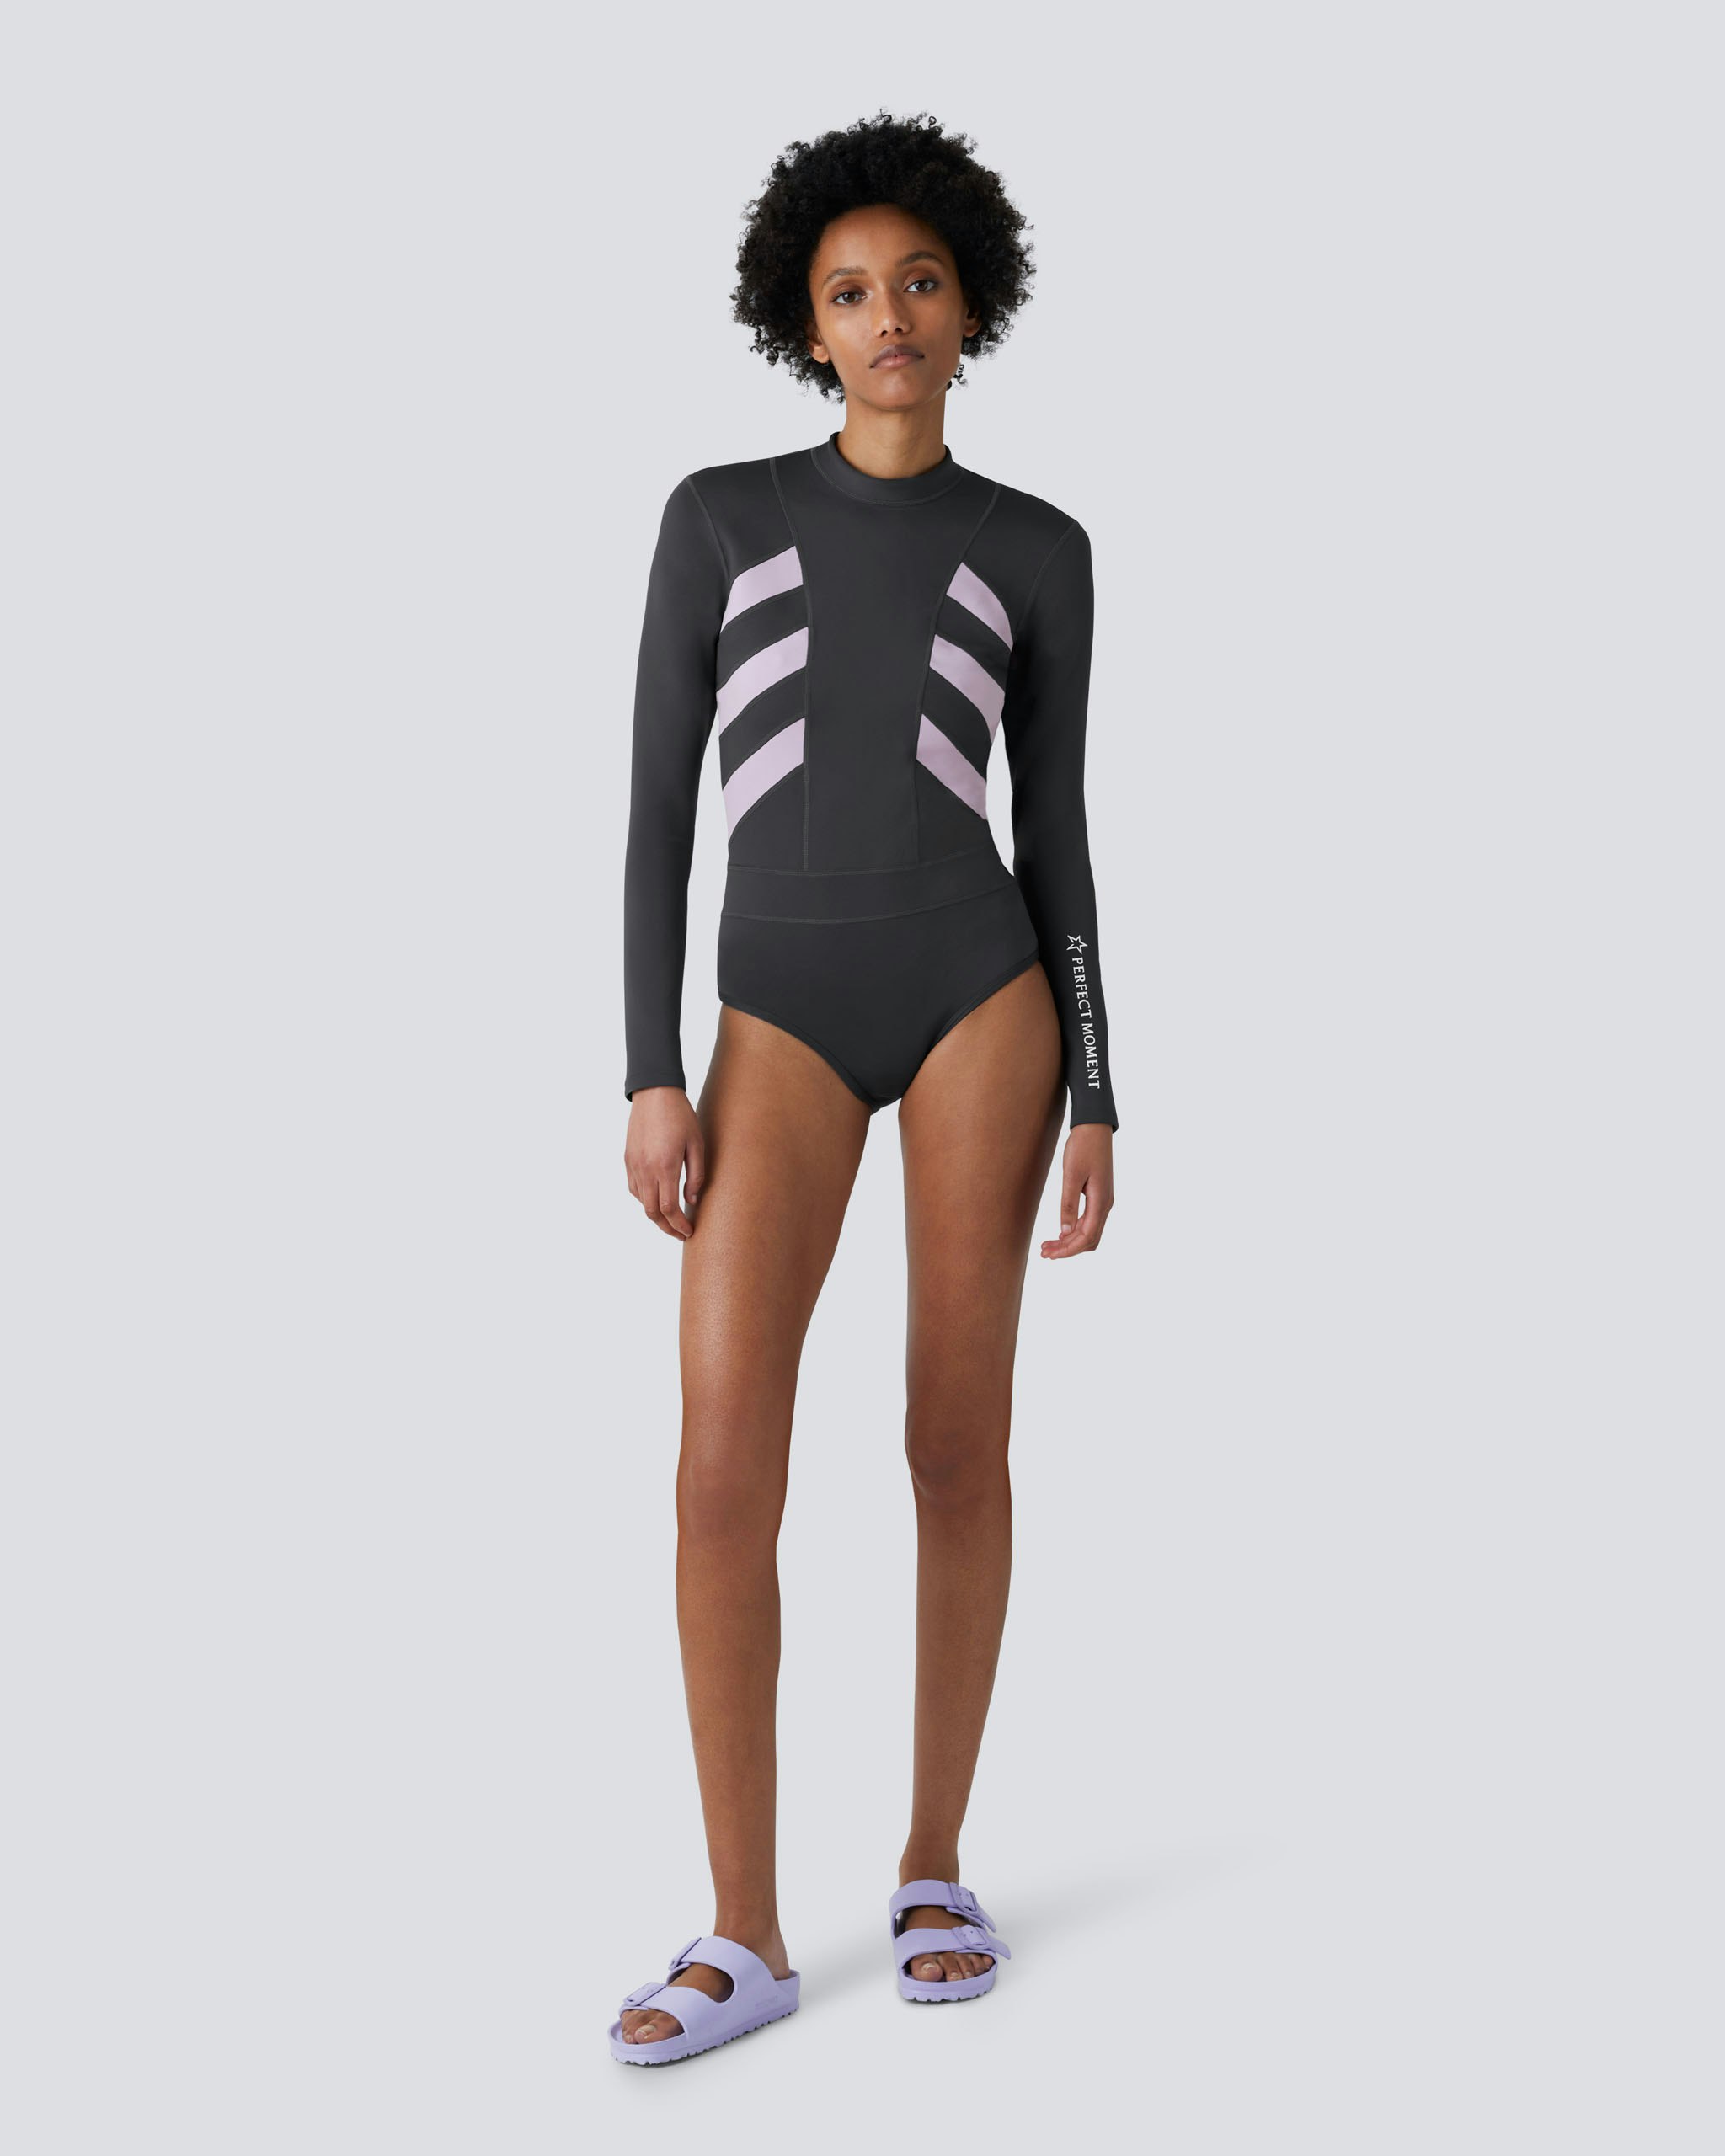 Imok Wetsuit